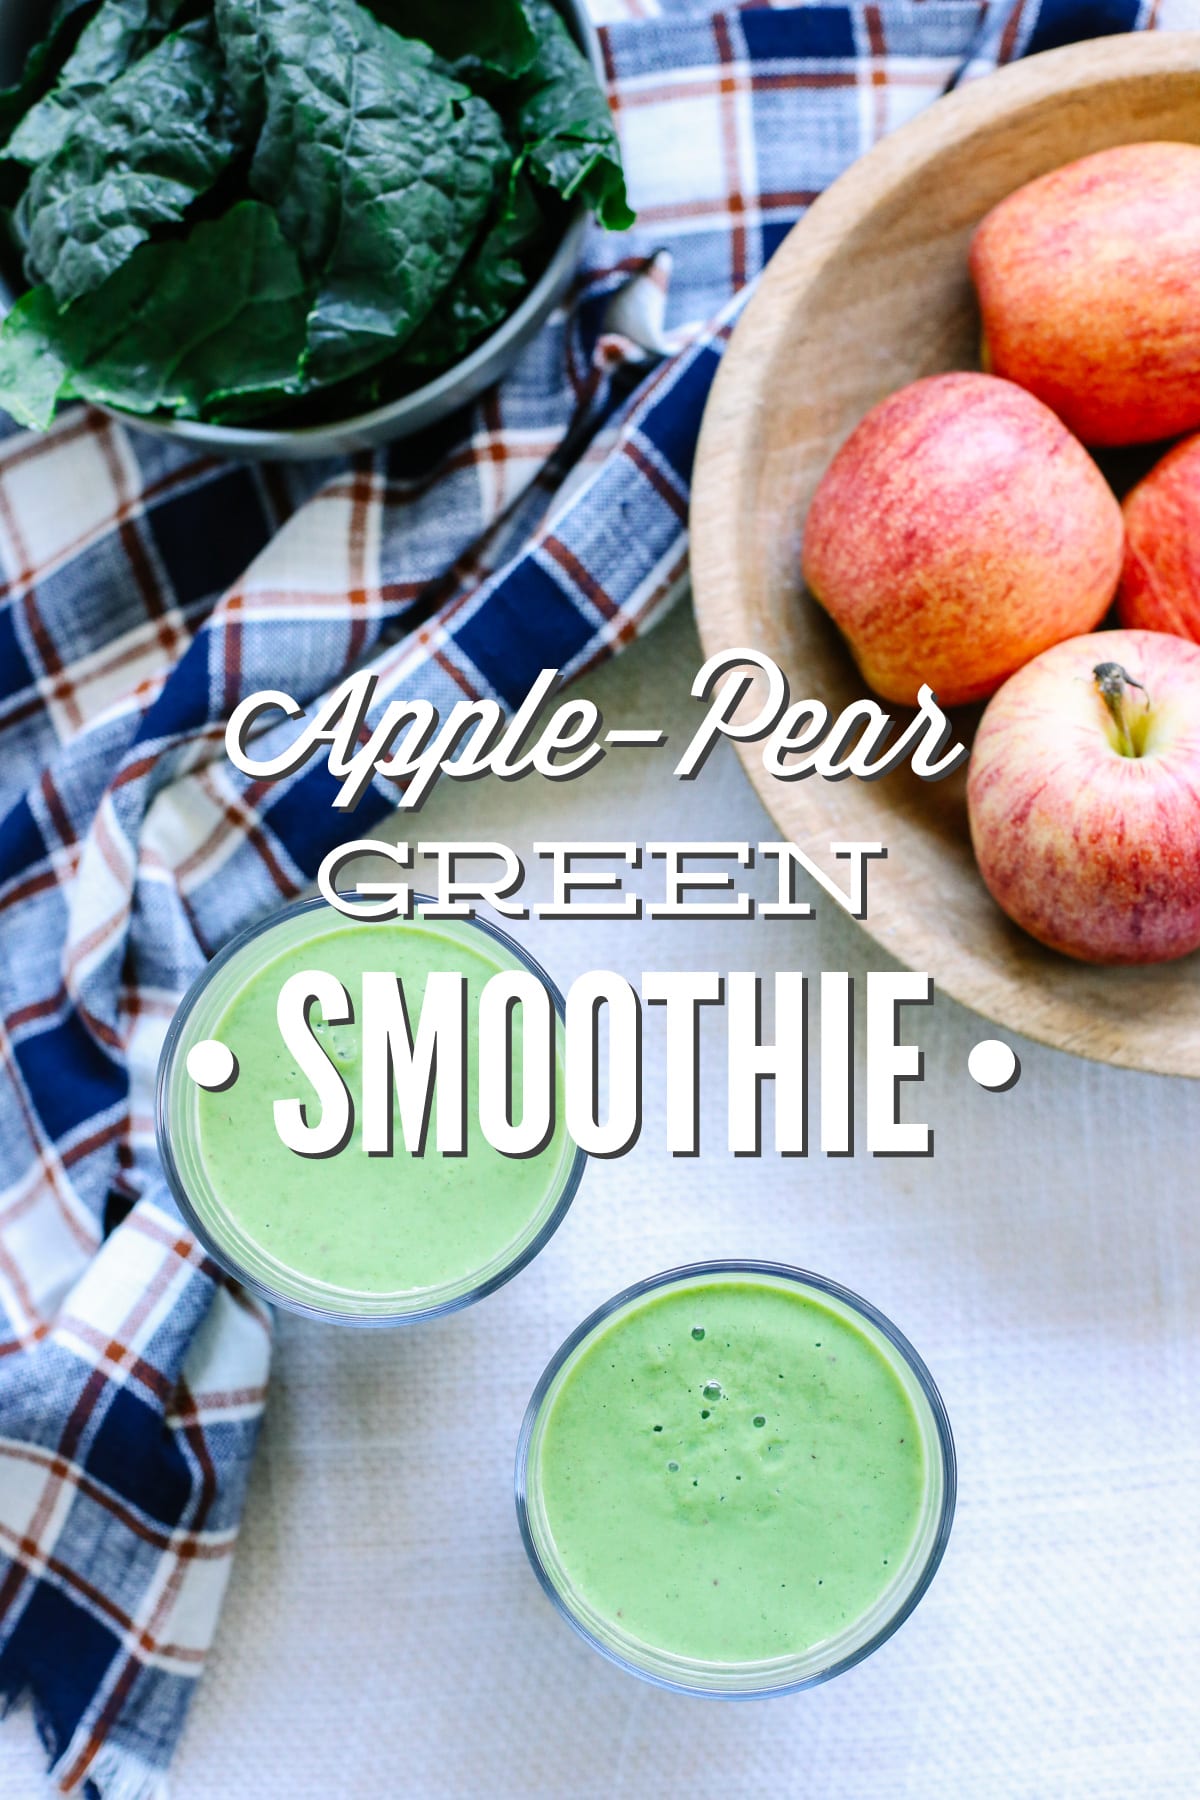 Apple-Pear Green Smoothie